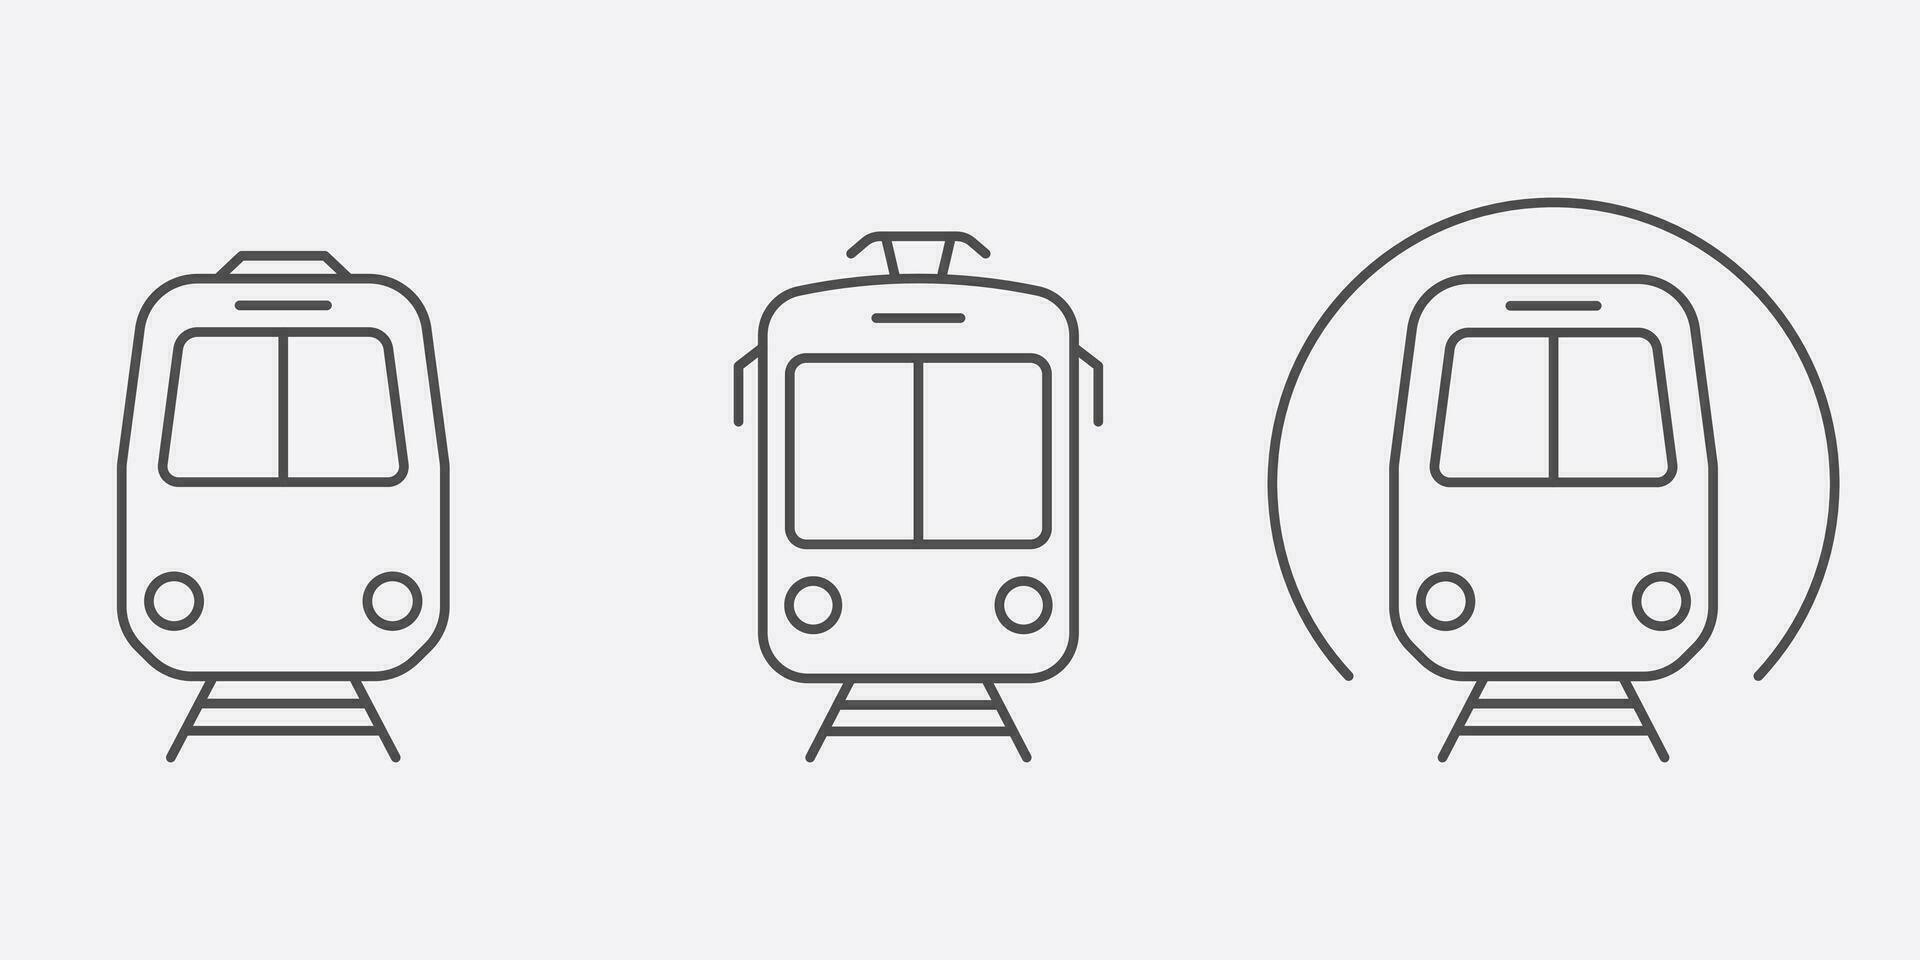 Train, Tram, Metro Station Line Icon Set. Railway Public Transportation Pictogram. Electric Tramway, Subway Outline Sign. Road Traffic Symbol Collection. Editable Stroke. Isolated Vector Illustration.